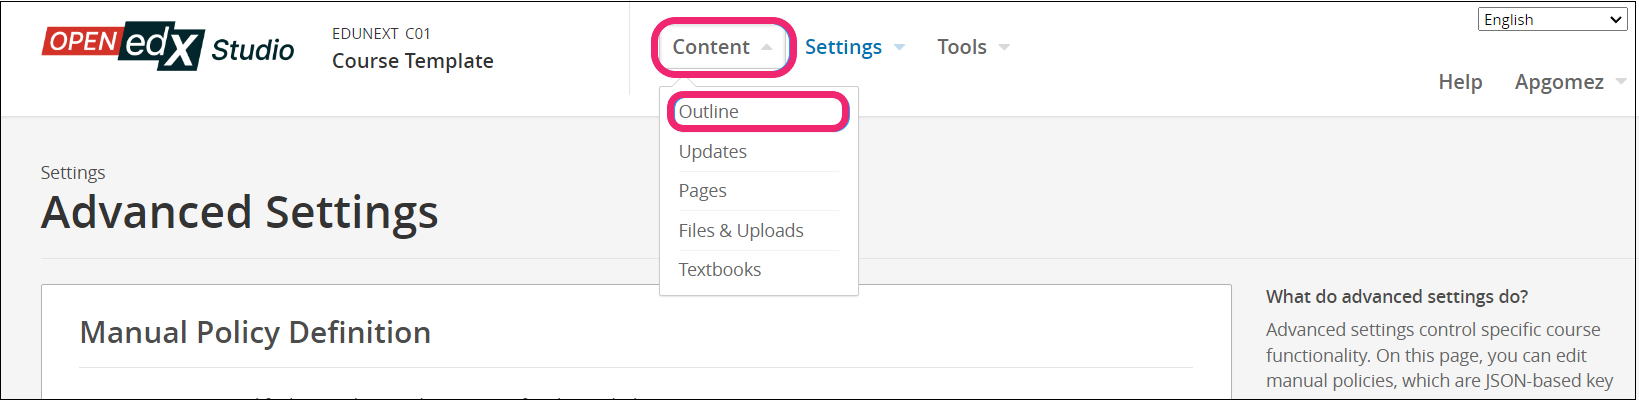 This image shows the Content tab and the Outline option.